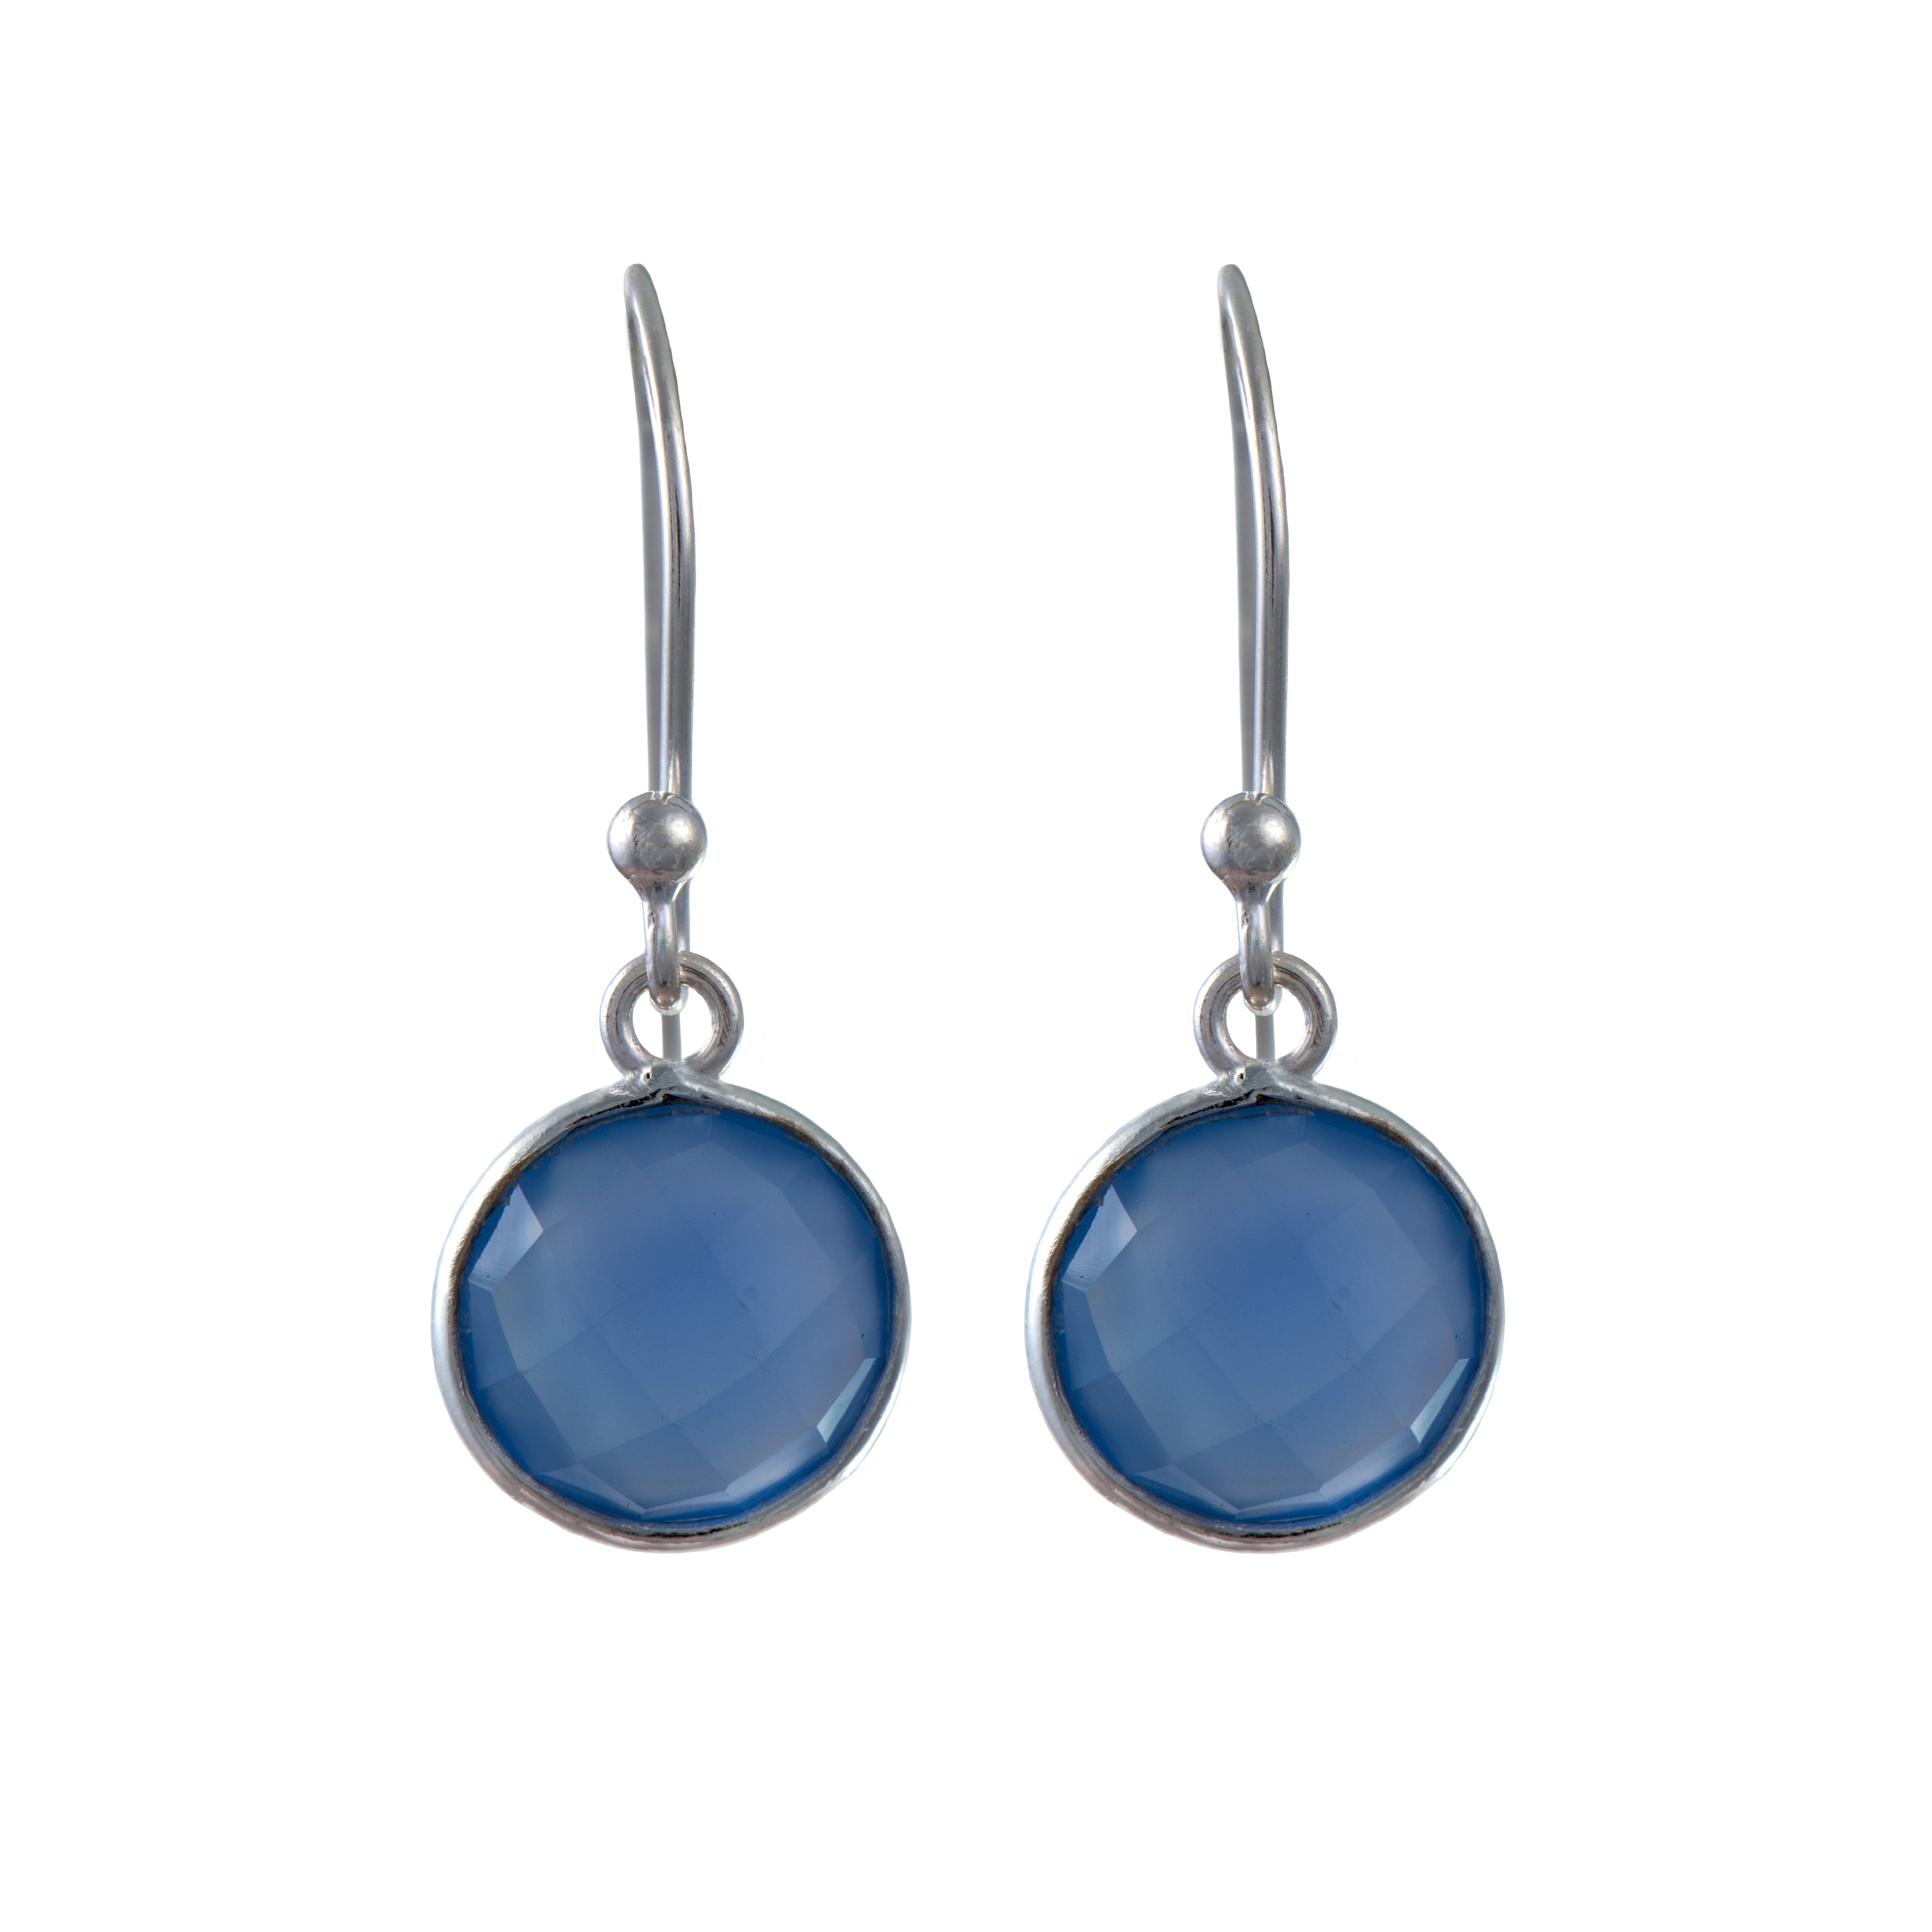 Blue Chalcedony Sterling Silver Earrings with a Round Faceted Gemstone Drop